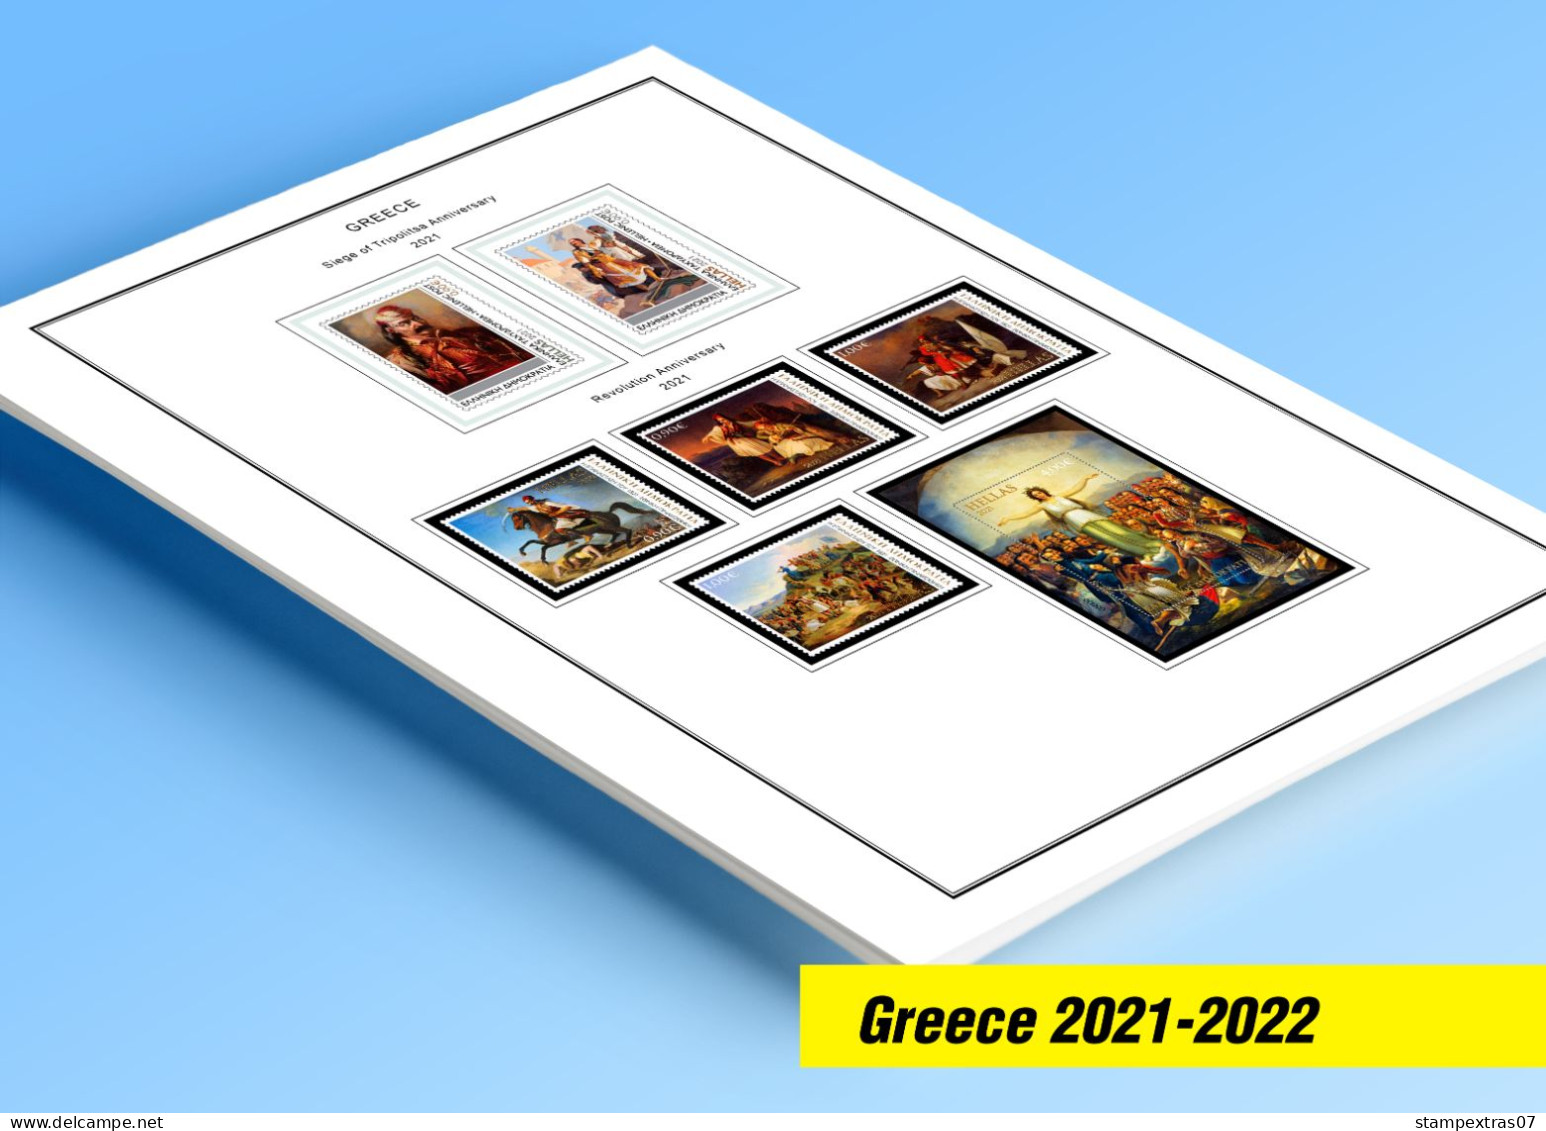 COLOR PRINTED GREECE 2021-2022 STAMP ALBUM PAGES (15 Illustrated Pages) >> FEUILLES ALBUM - Pre-printed Pages